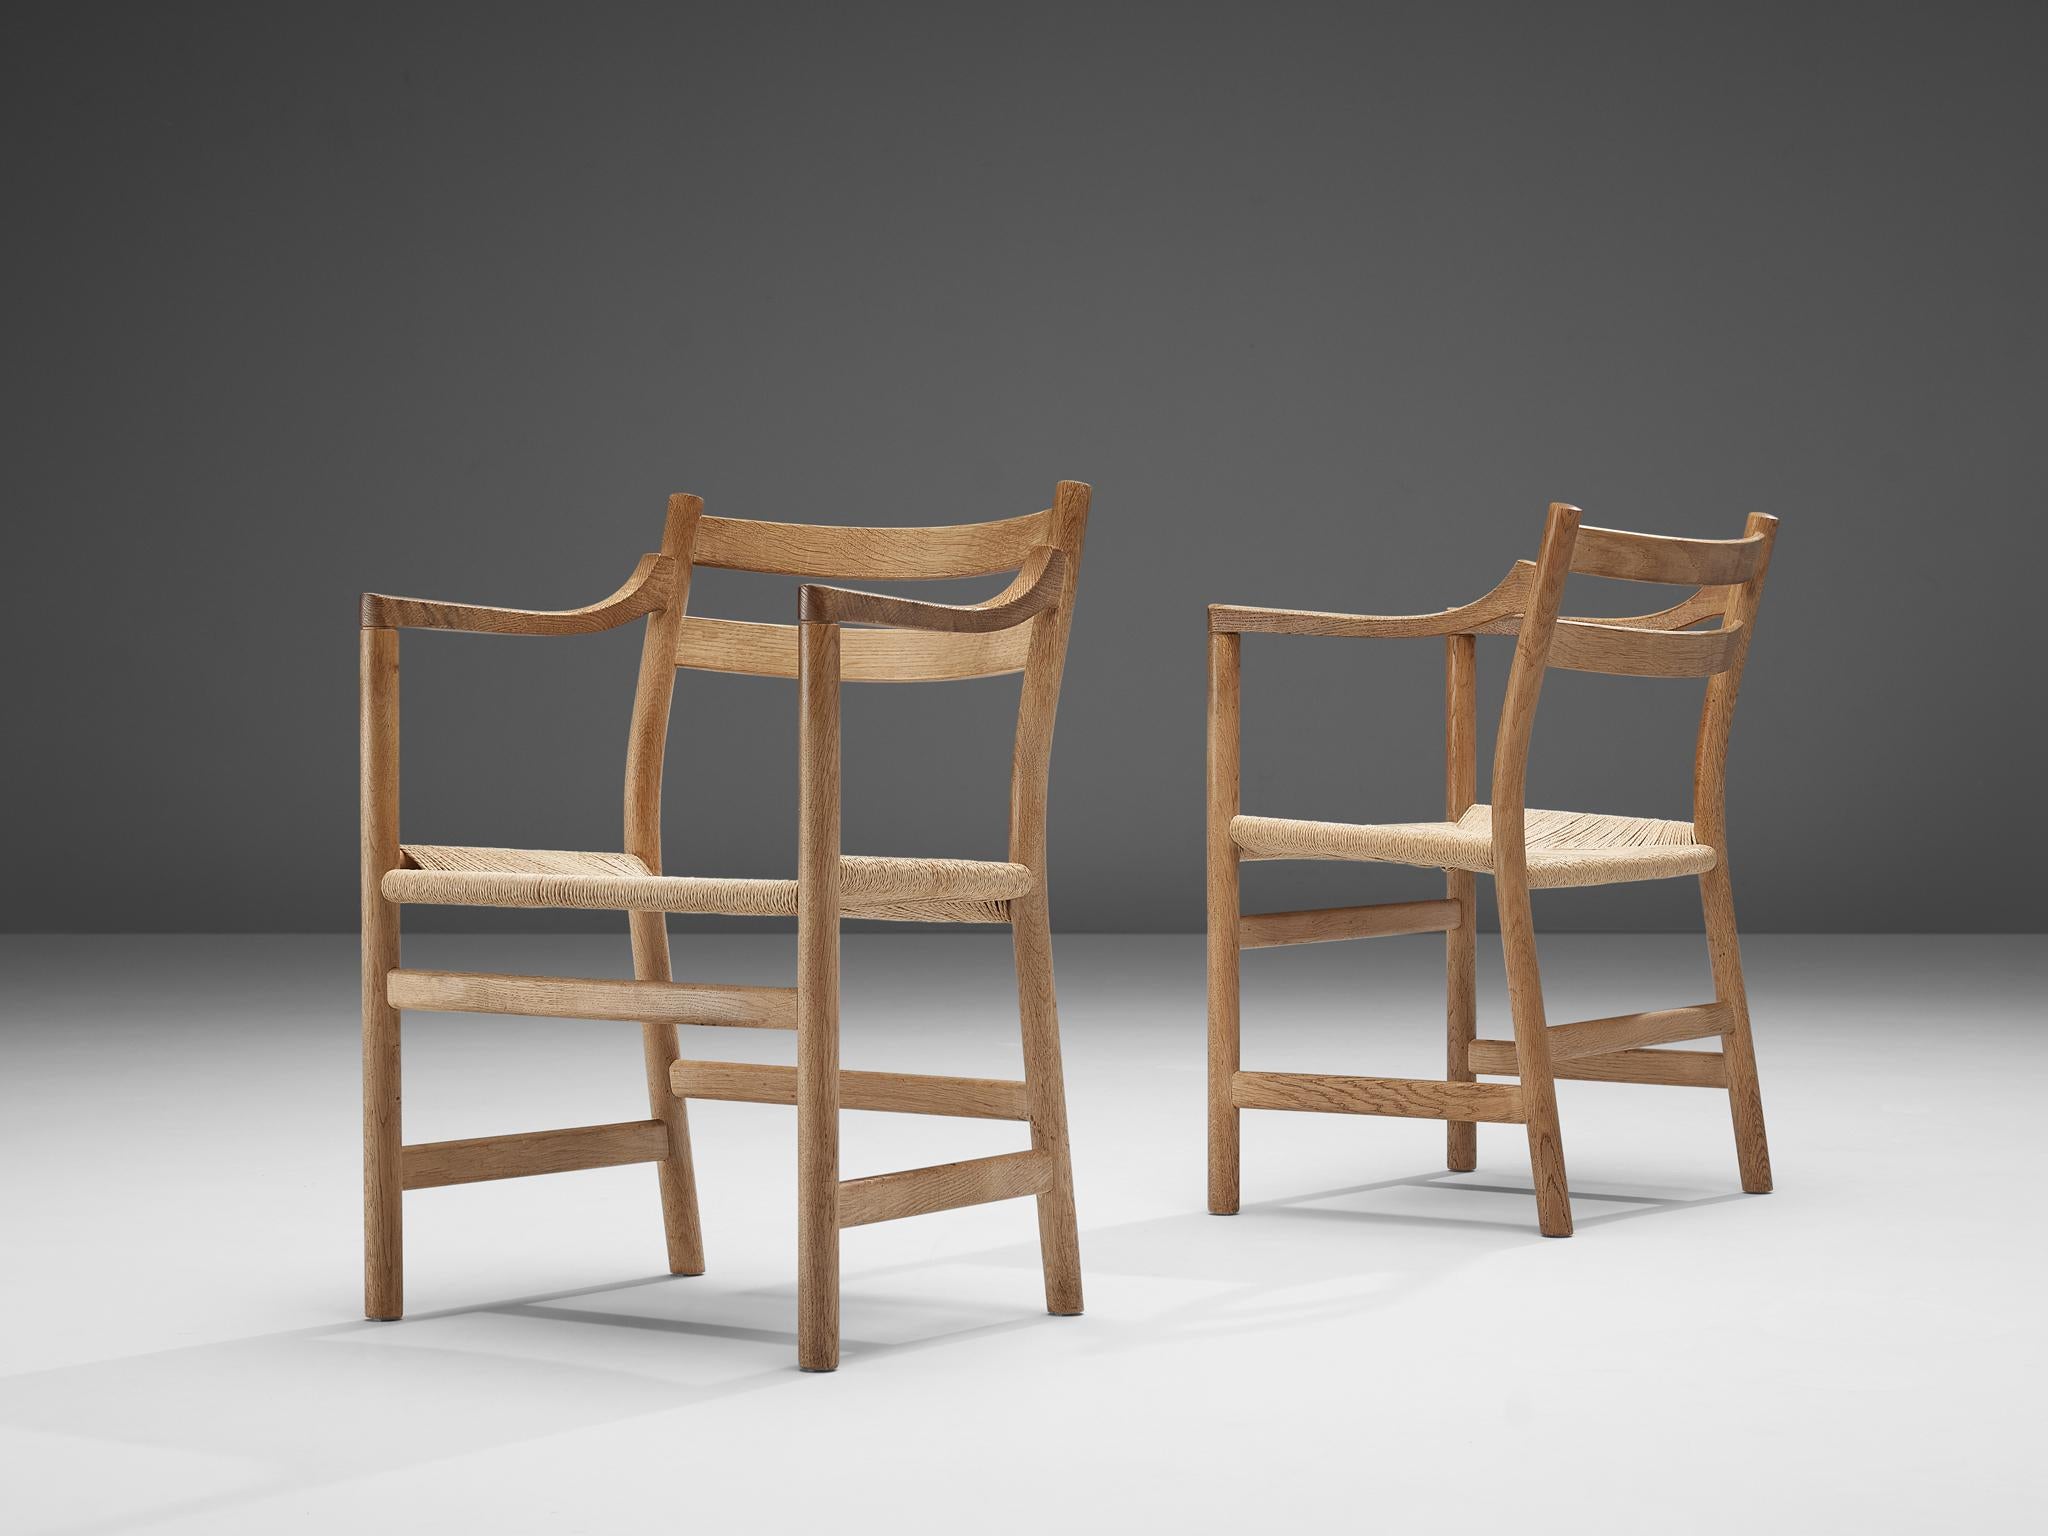 Kurt Ostervig for KP Møbler, pair of armchairs model KP22, oak and paper cord, Denmark, 1960s

This pair of armchairs is designed by Kurt Ostervig and produced by KP Møbler in the 1960s. The design is modest, well executed and quintessentially